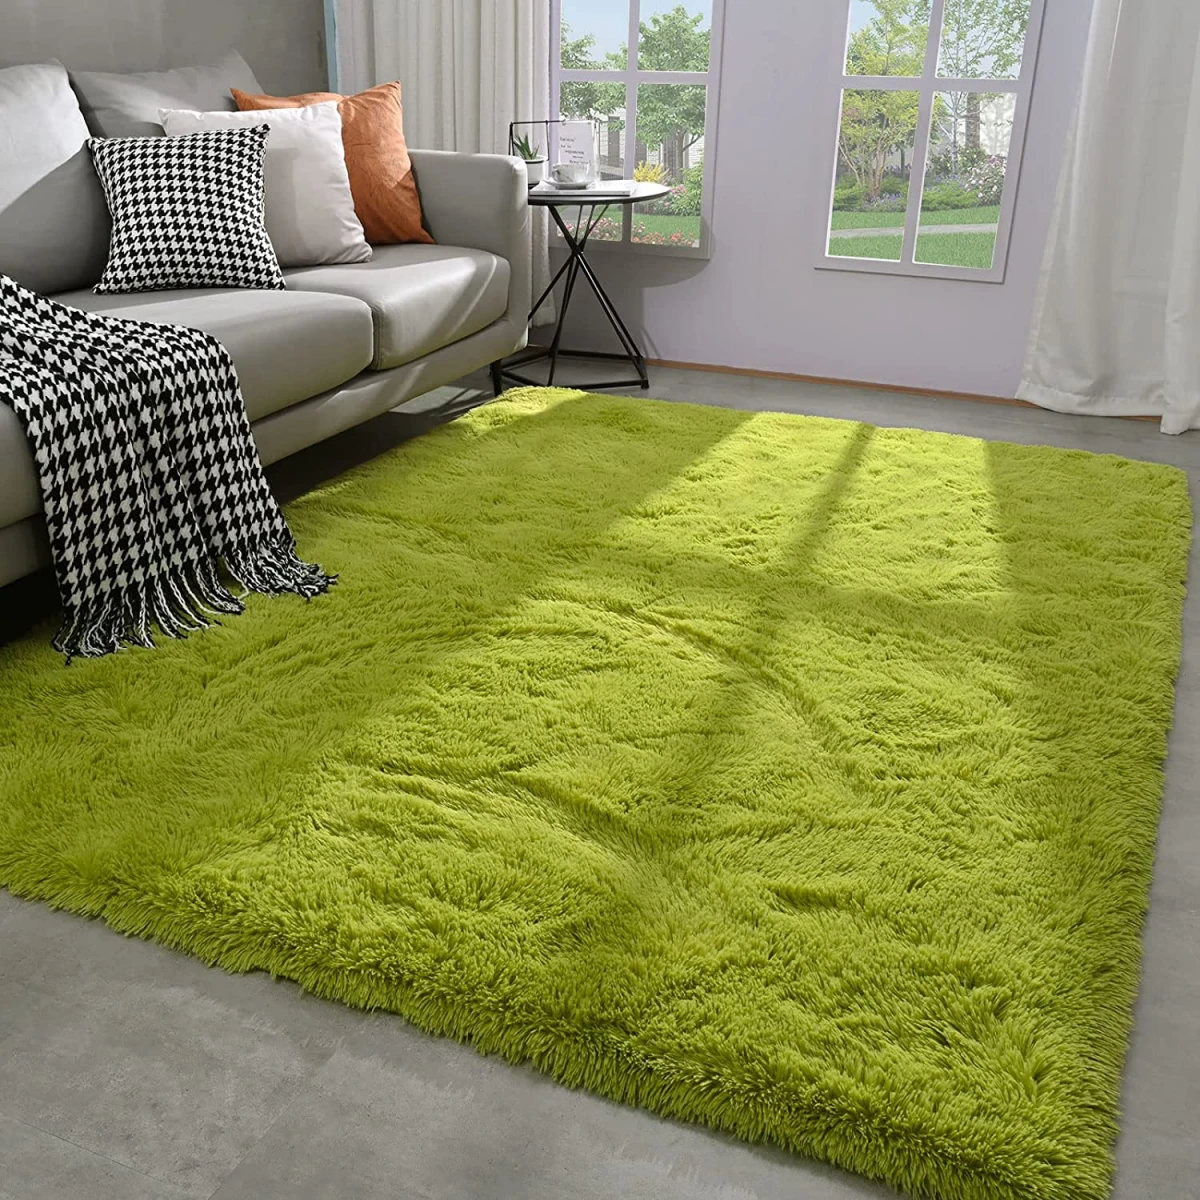 rug colors lime green fluffy rug